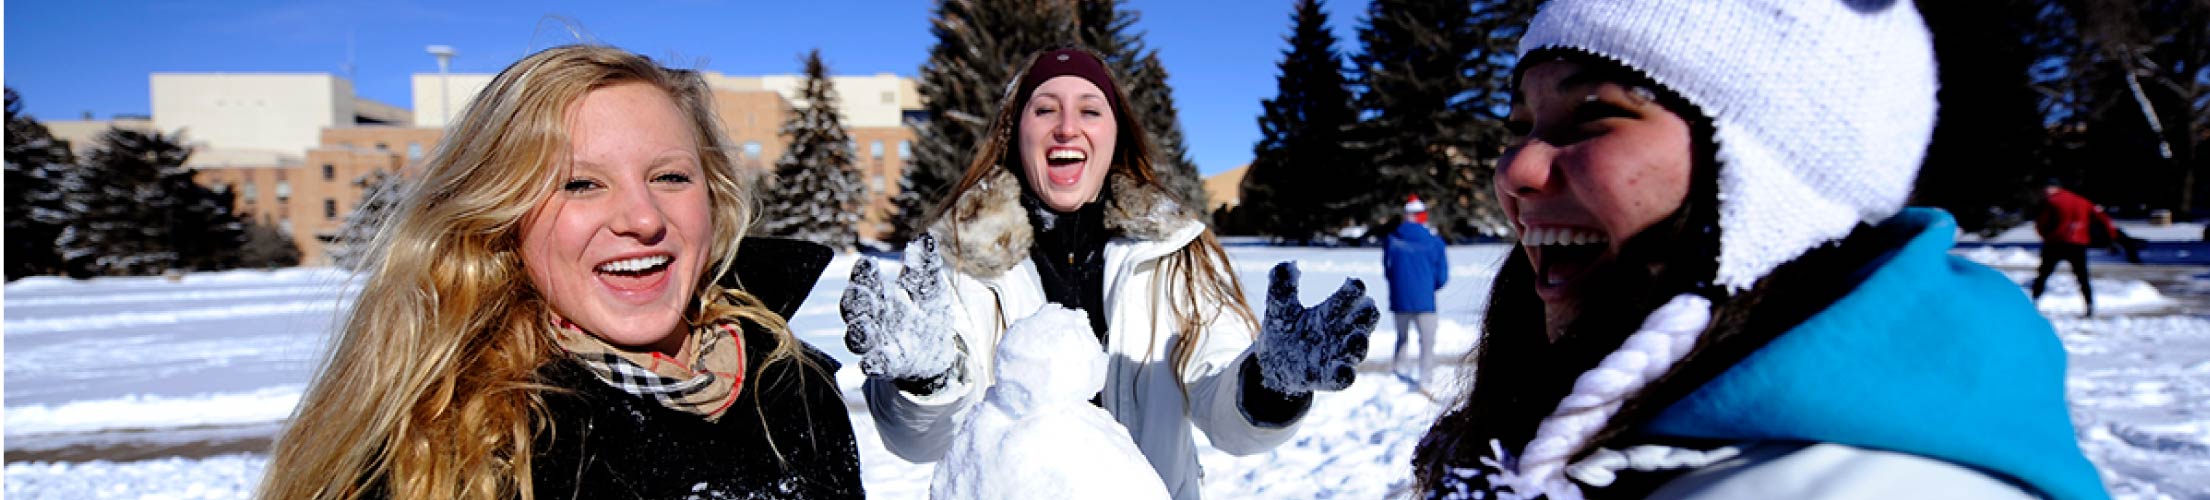 Three students play in the snow together on campus.